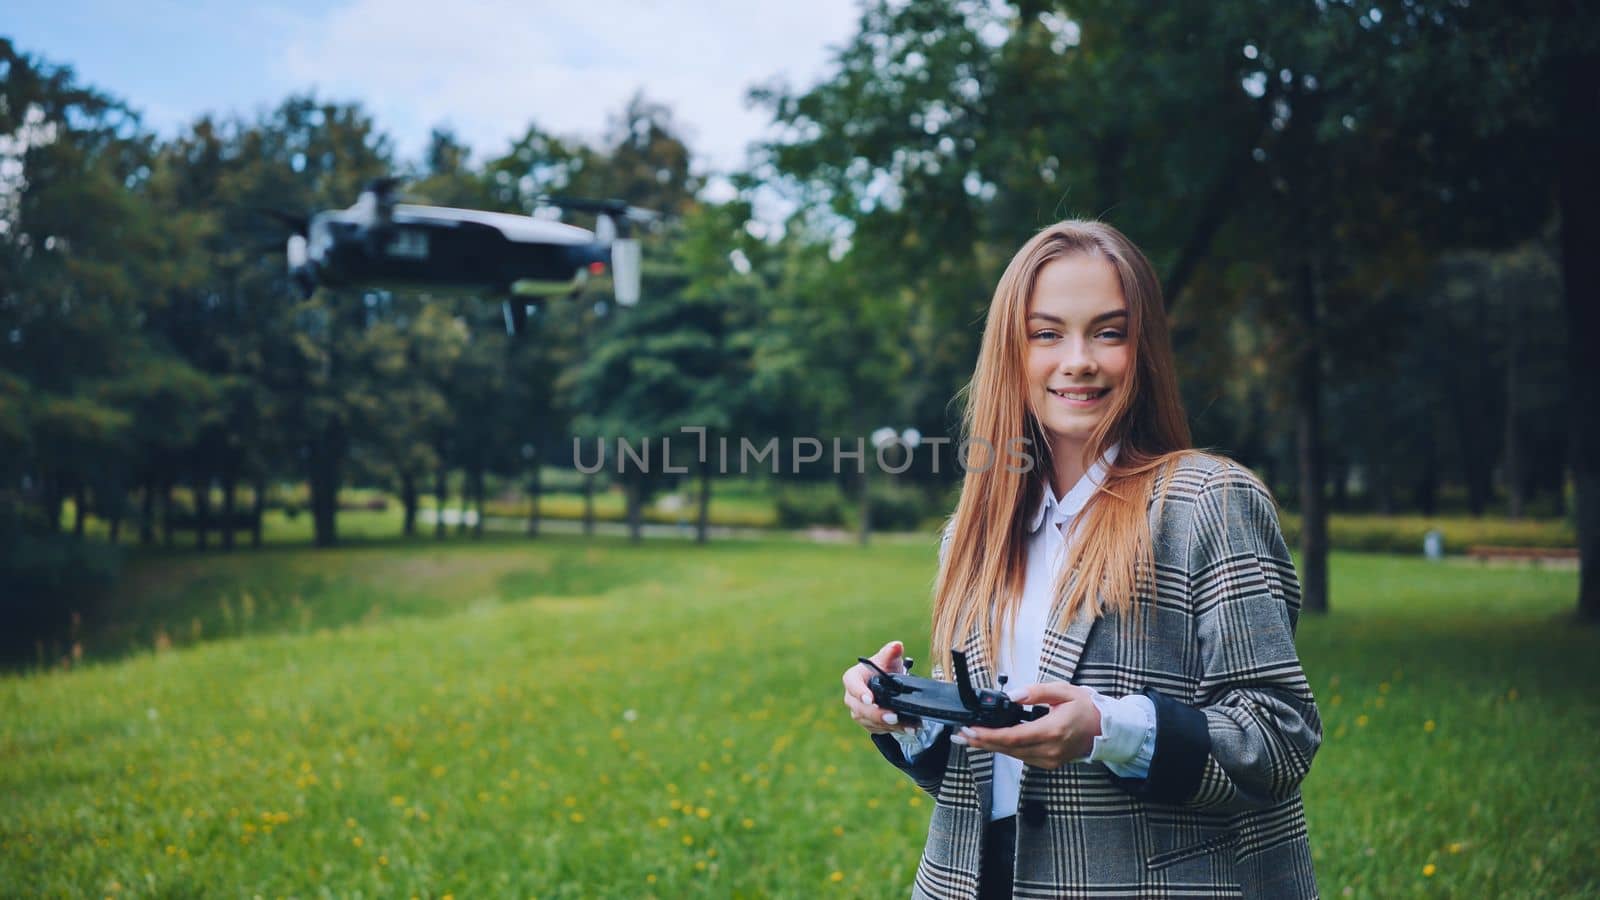 A cute girl controls a drone in the park